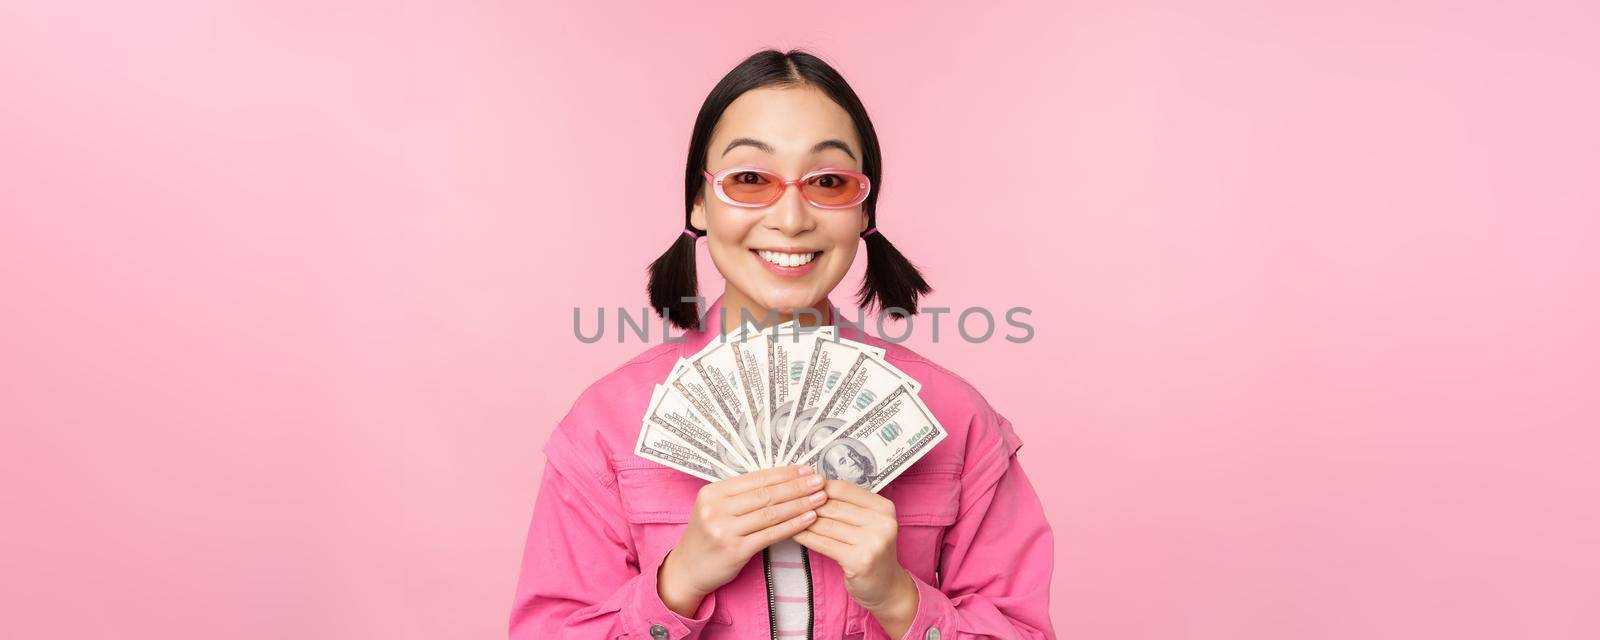 Microcredit and fast loans concept. Excited stylish korean girl, showing money, cash dollars and looking happy, standing in sunglasses over pink background.